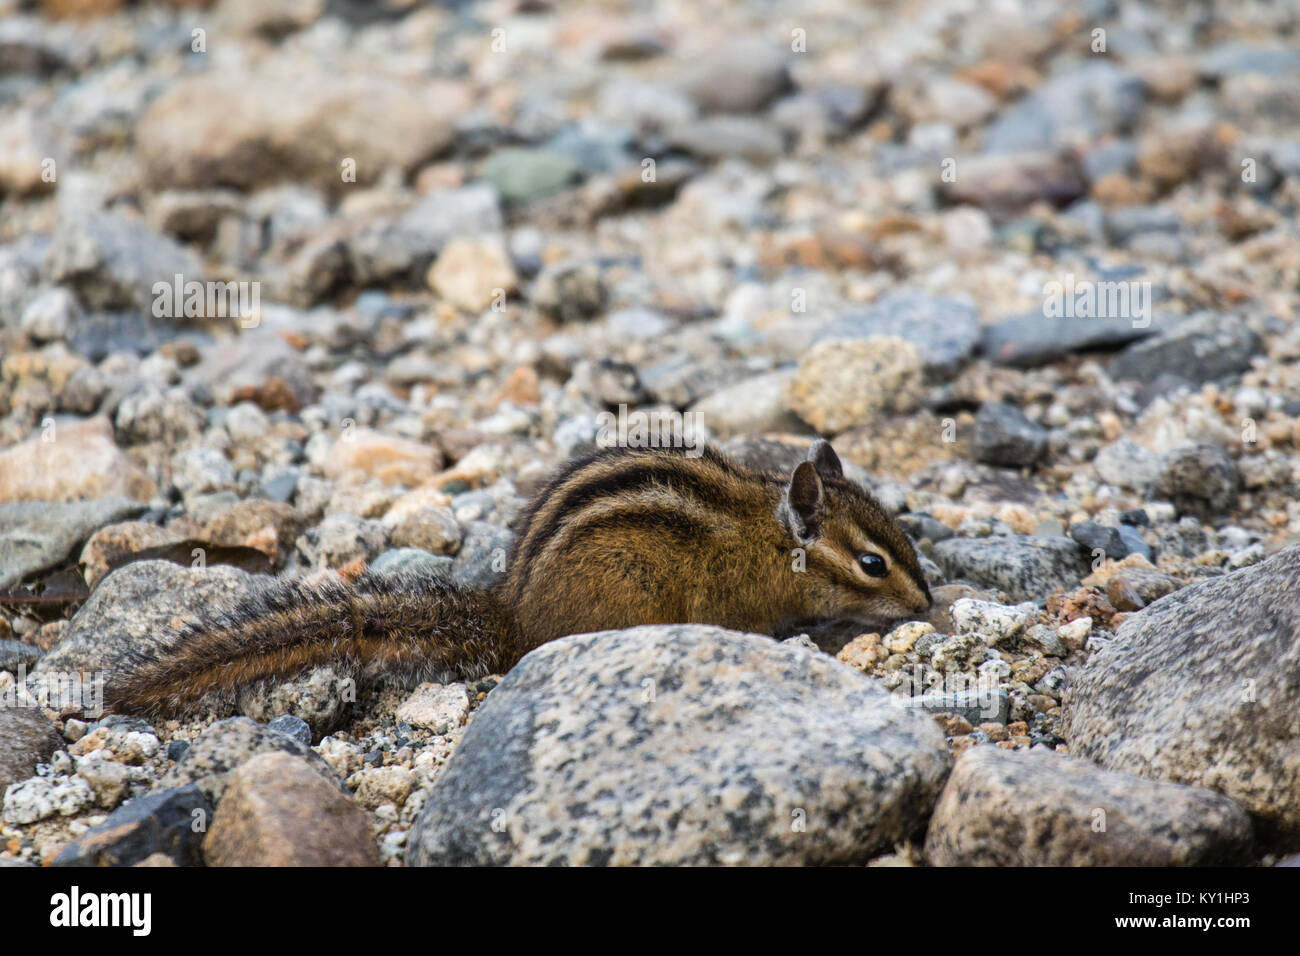 A cute chipmunk on the rocks in the Rocky Mountains Stock Photo